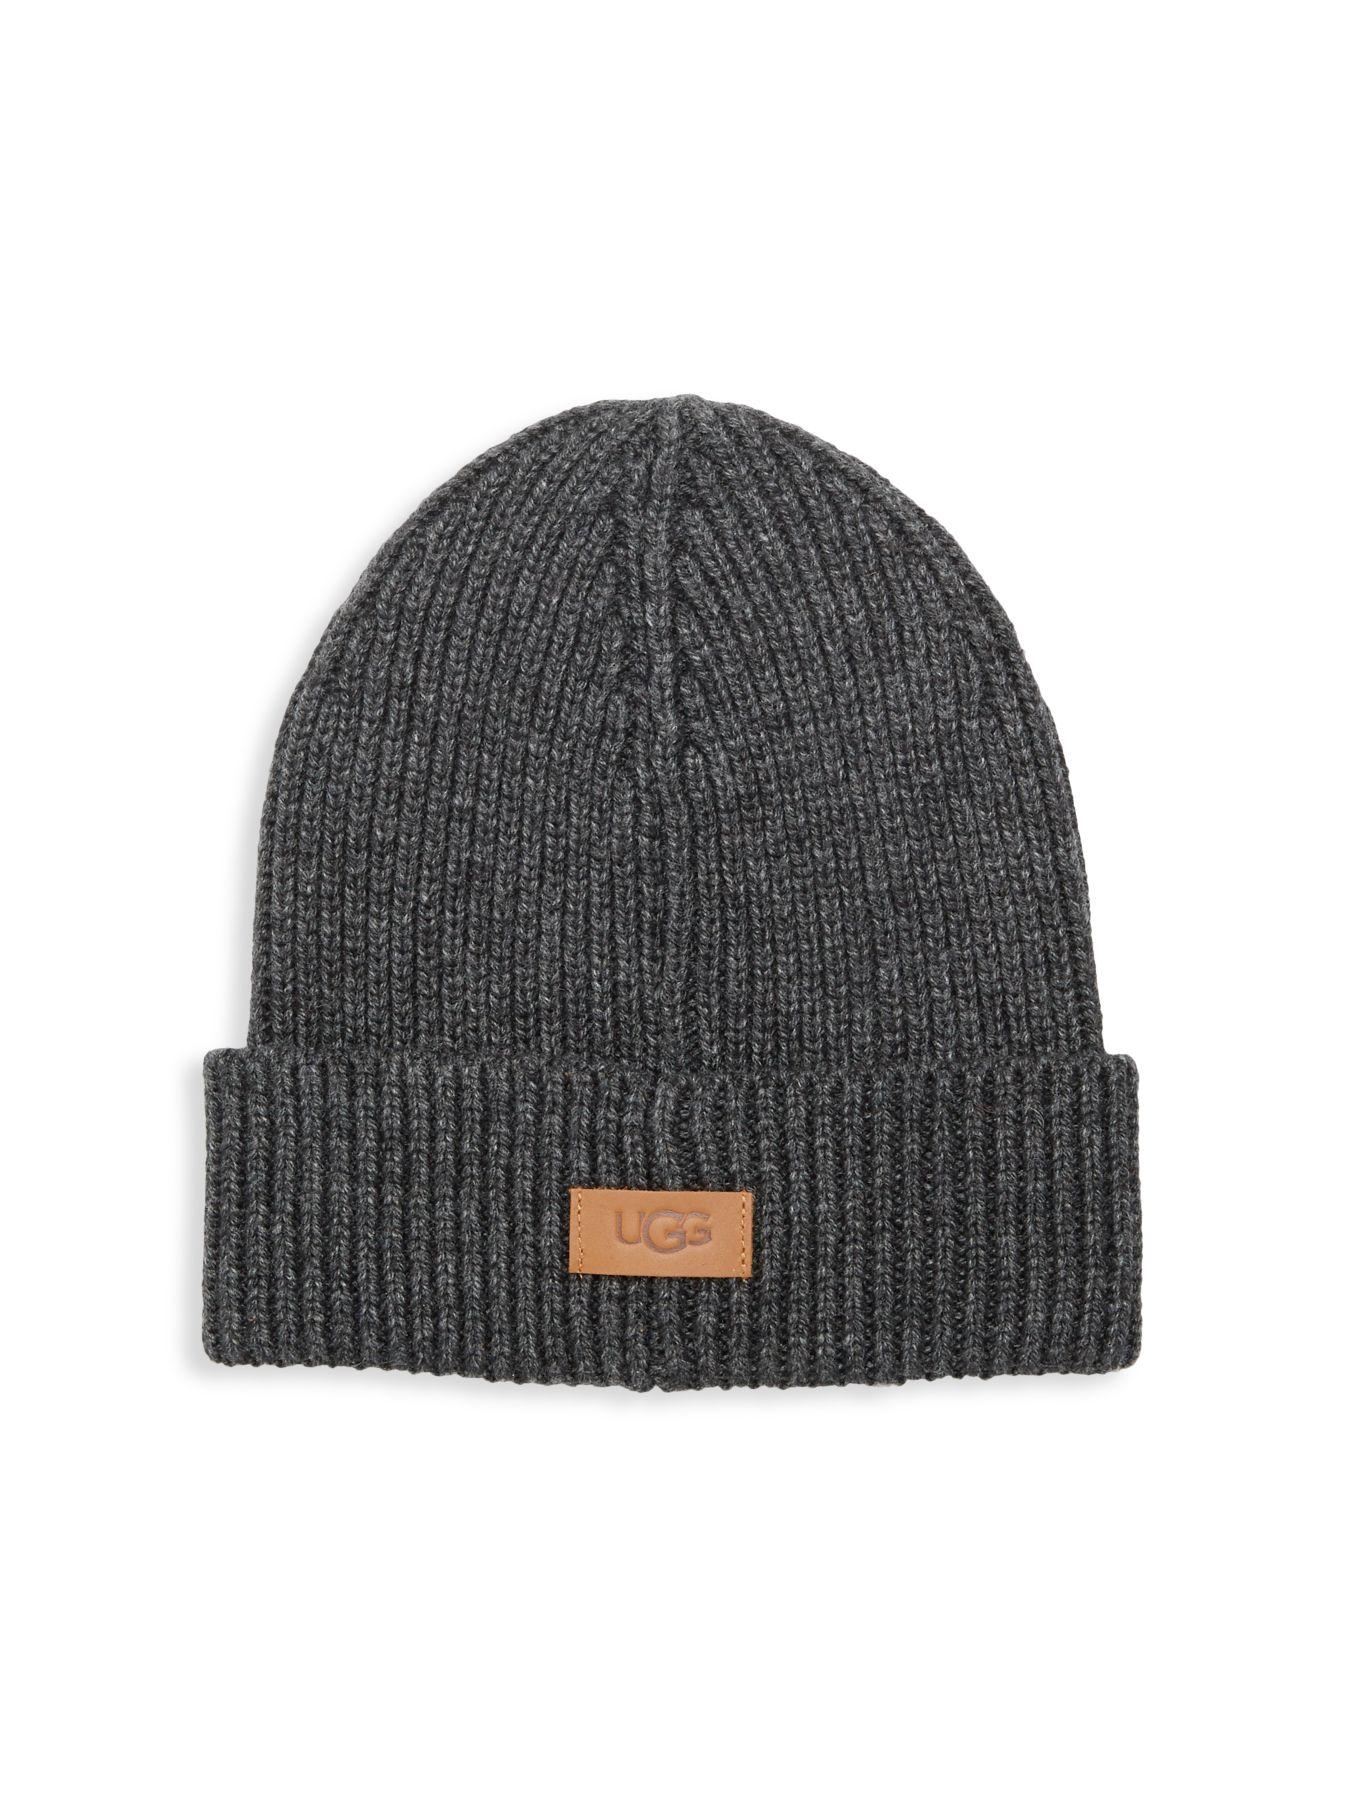 UGG Synthetic Ribbed Wide-cuff Beanie in Grey (Gray) for Men - Lyst